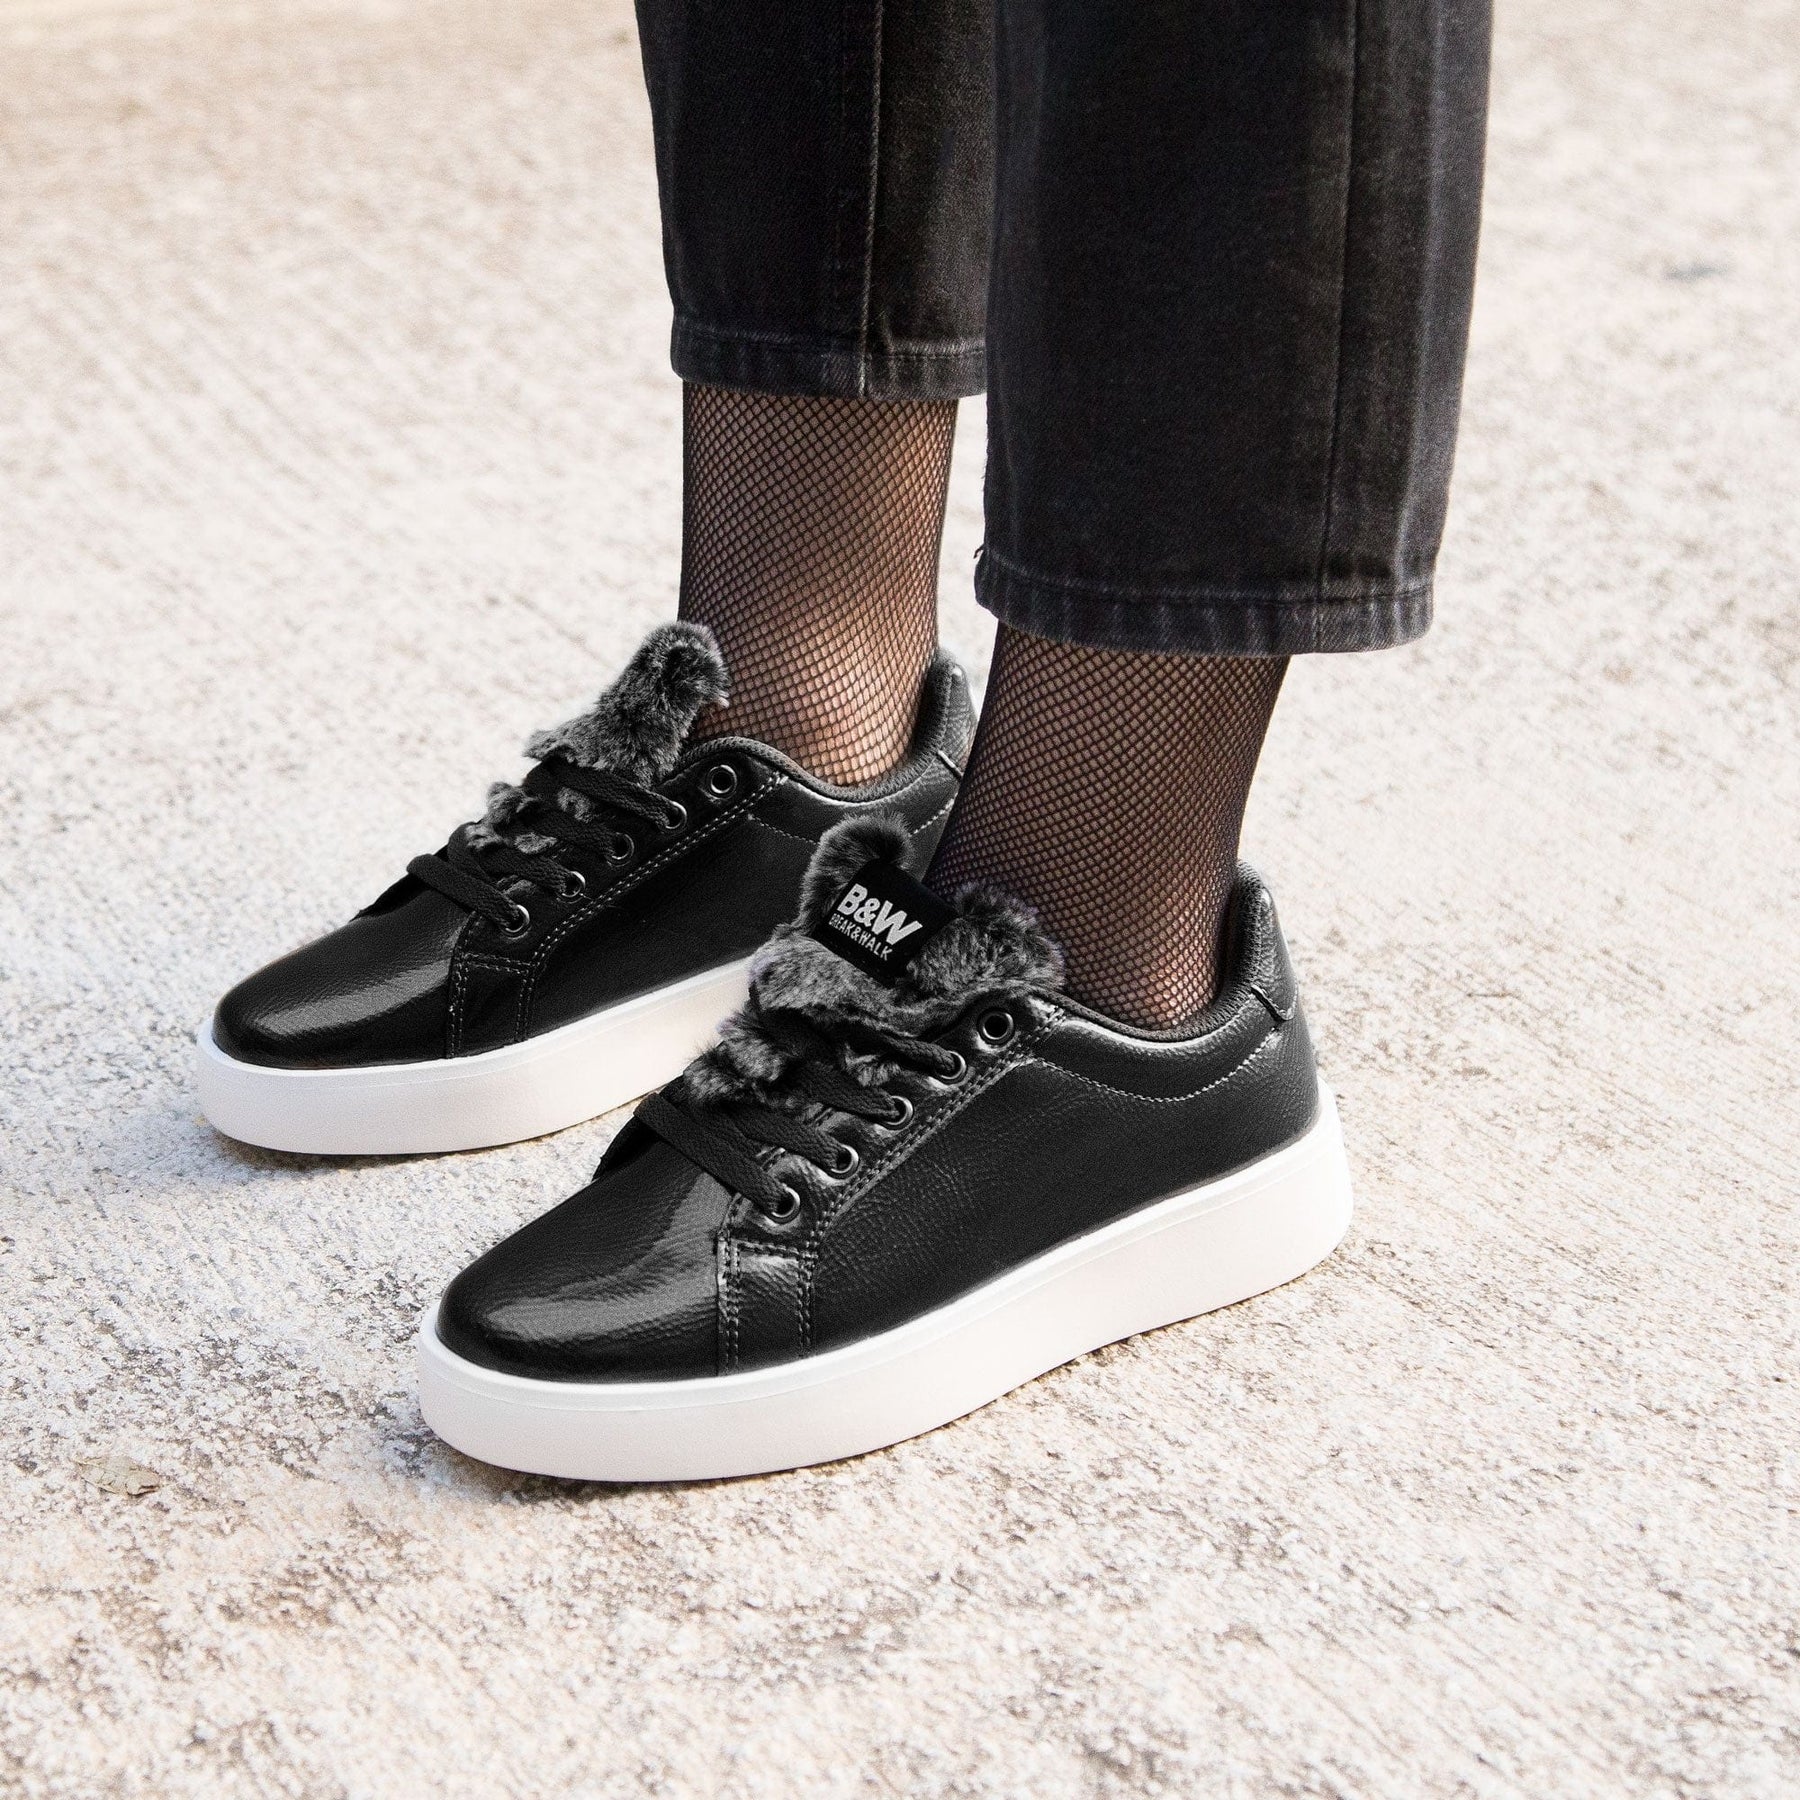 Sneakers Damsel Patent Leather Black